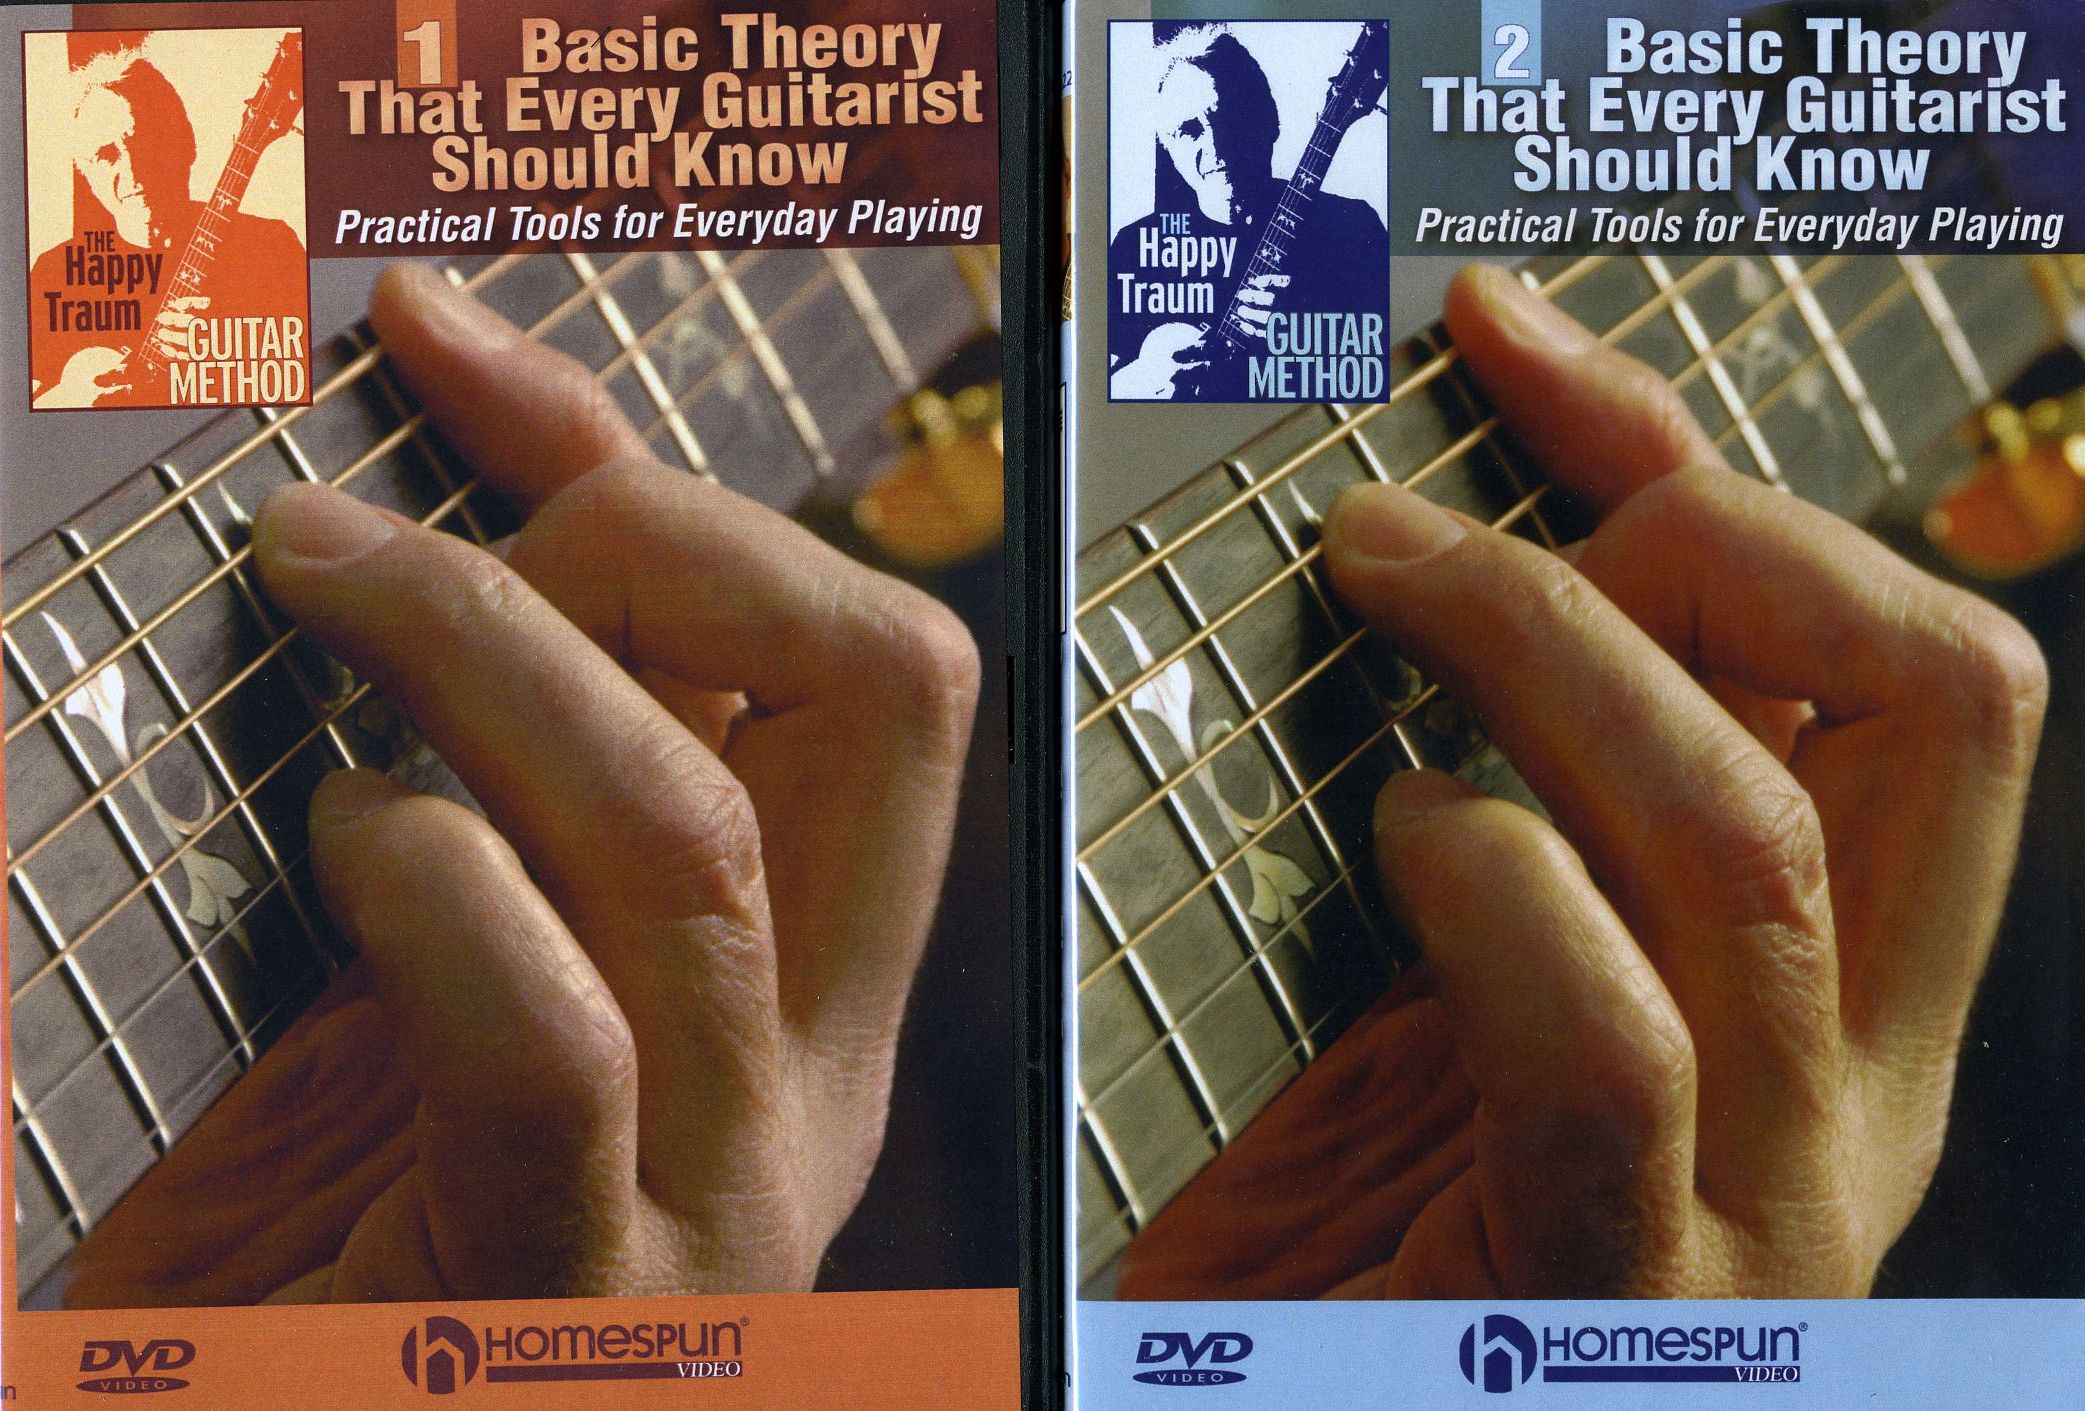 GUITAR METHOD: BASIC THEORY THAT EVERY GUITARIST